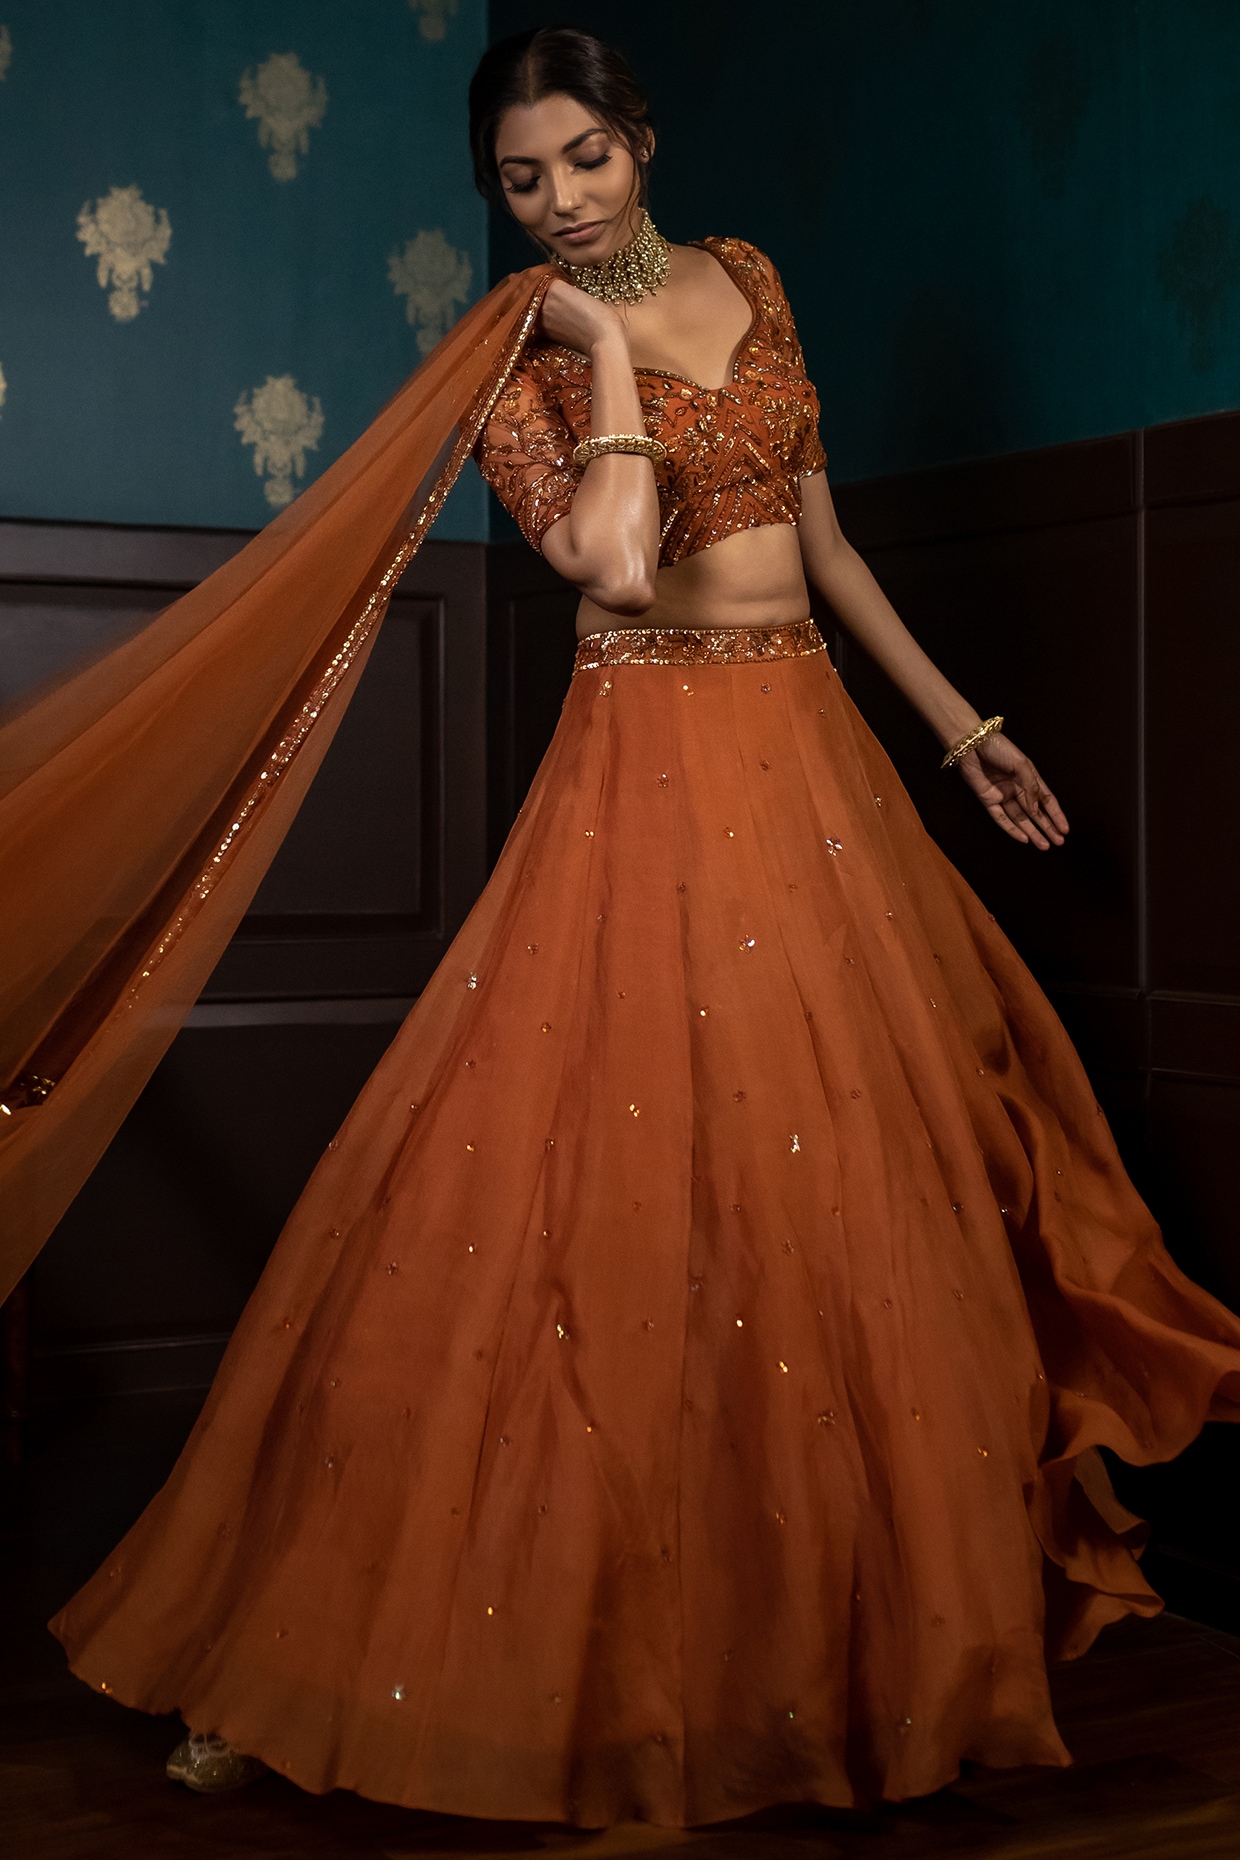 Indo-Western Blouse Designs To Pair With Heavy Lehengas To Slay Your Look